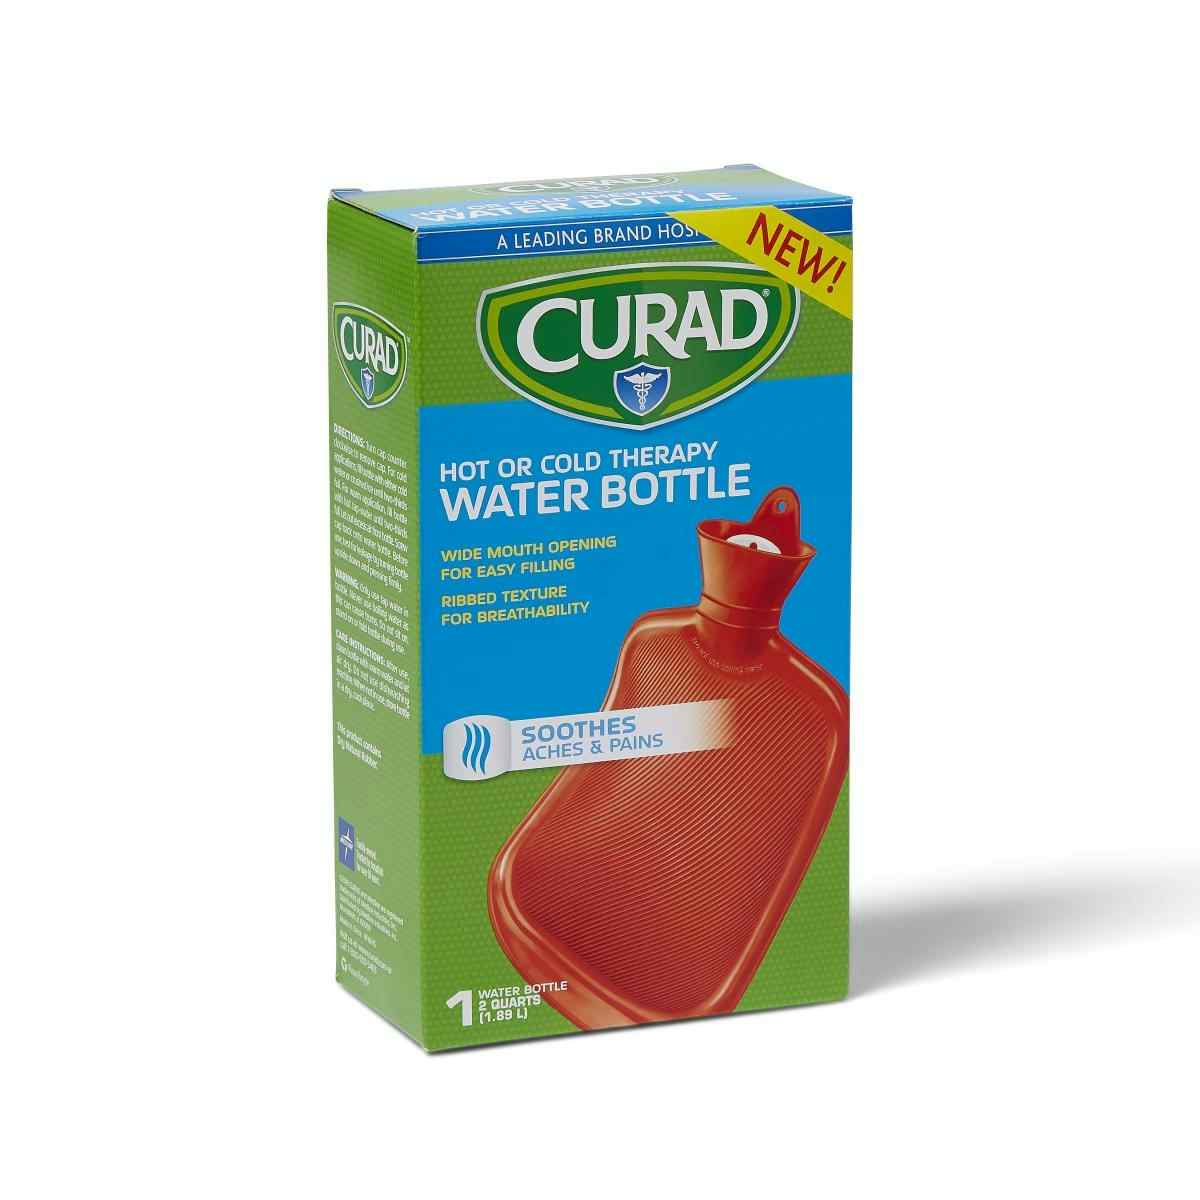 Curad Hot or Cold Therapy Water Bottle, CUR964H, 1 Each